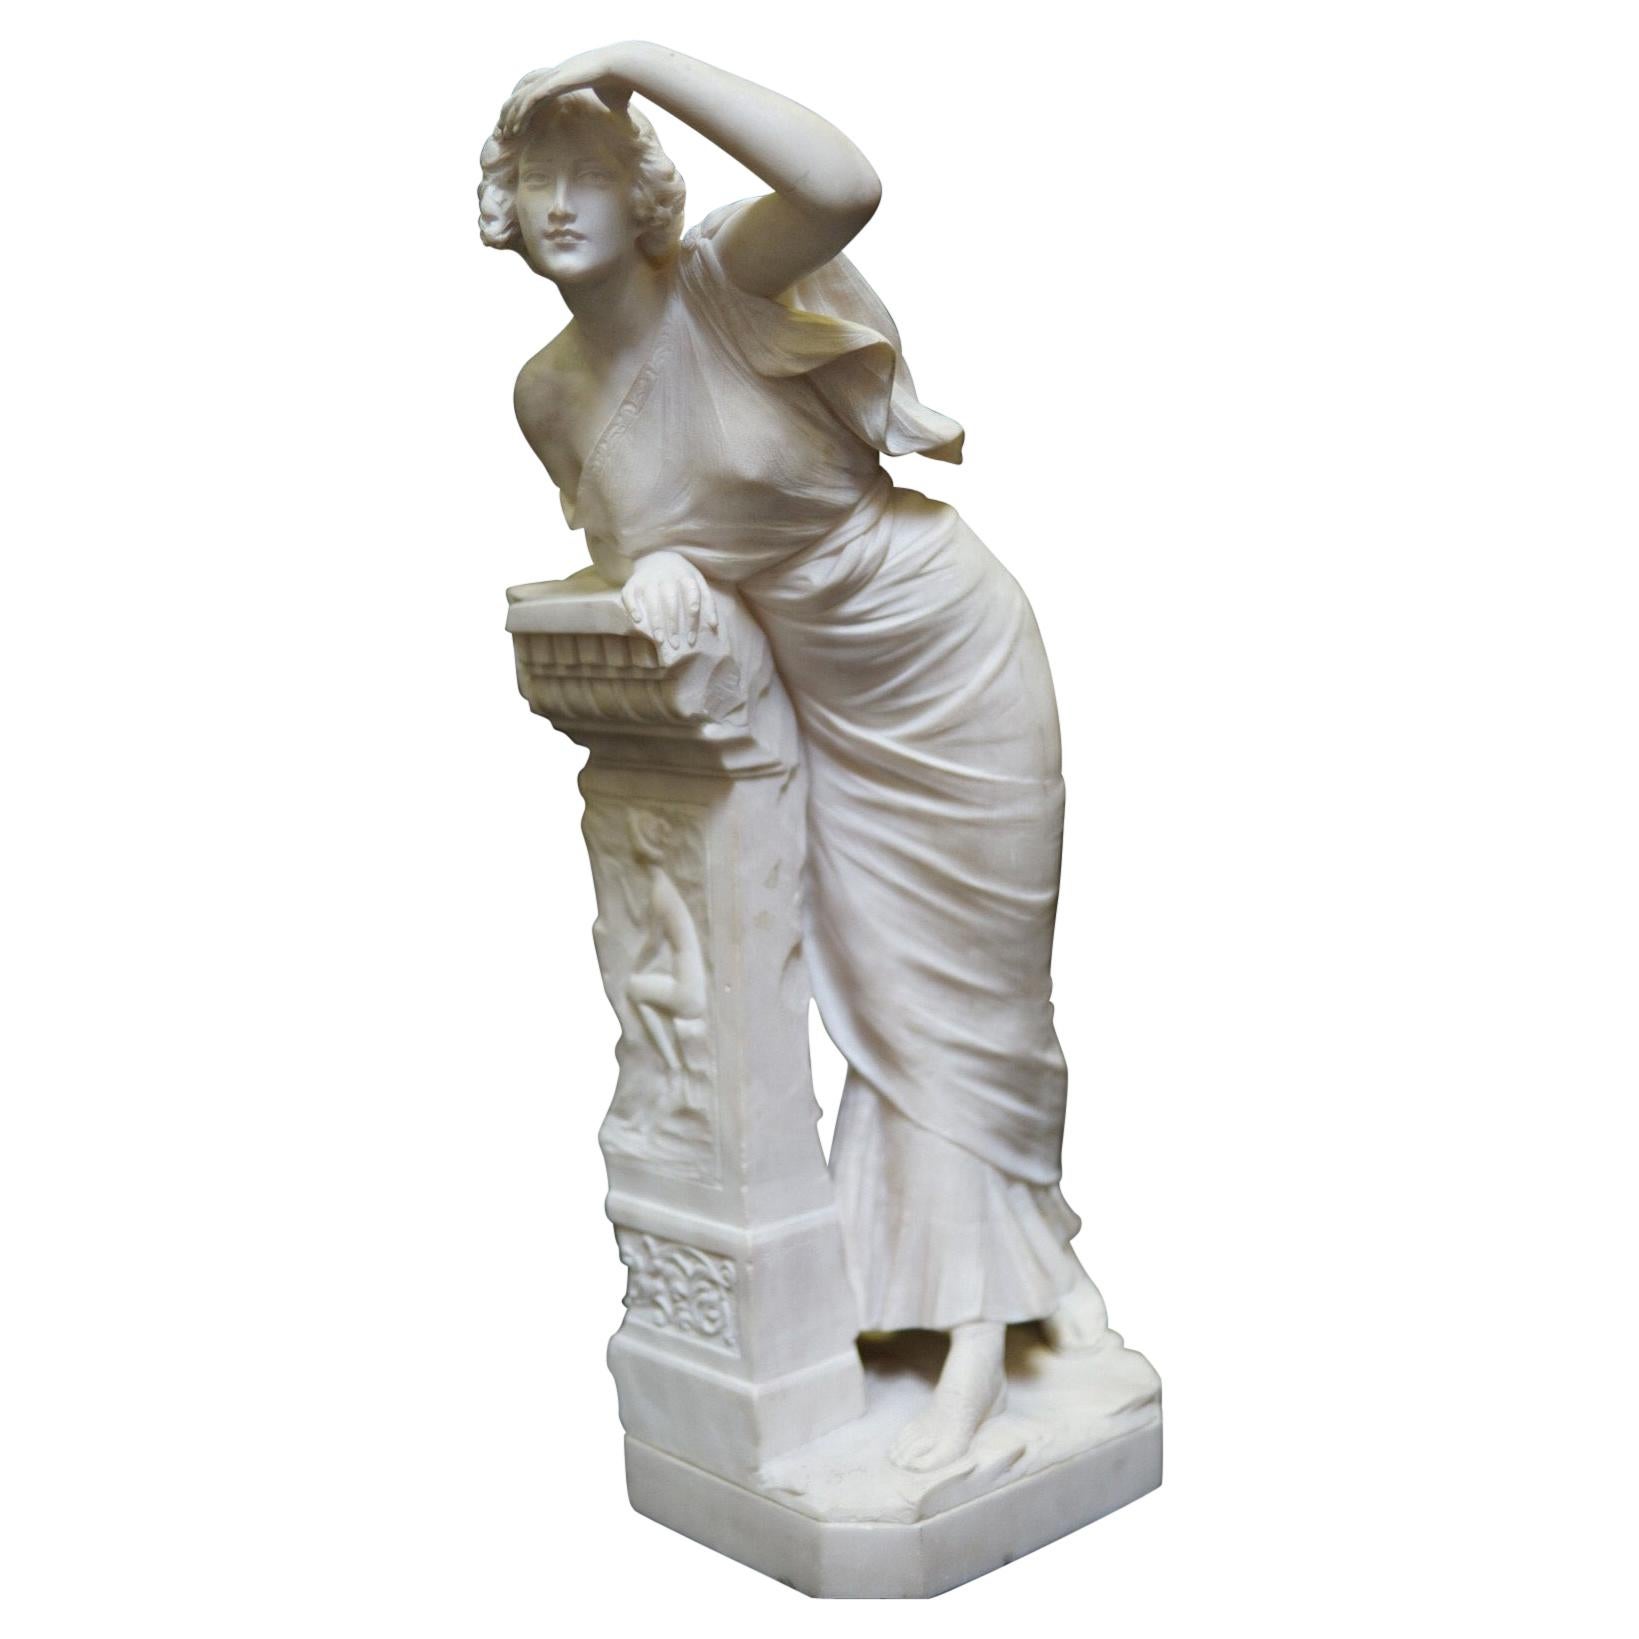 Italian Neoclassical Style Hand-Carved Alabaster Sculpture, 19 Century For Sale